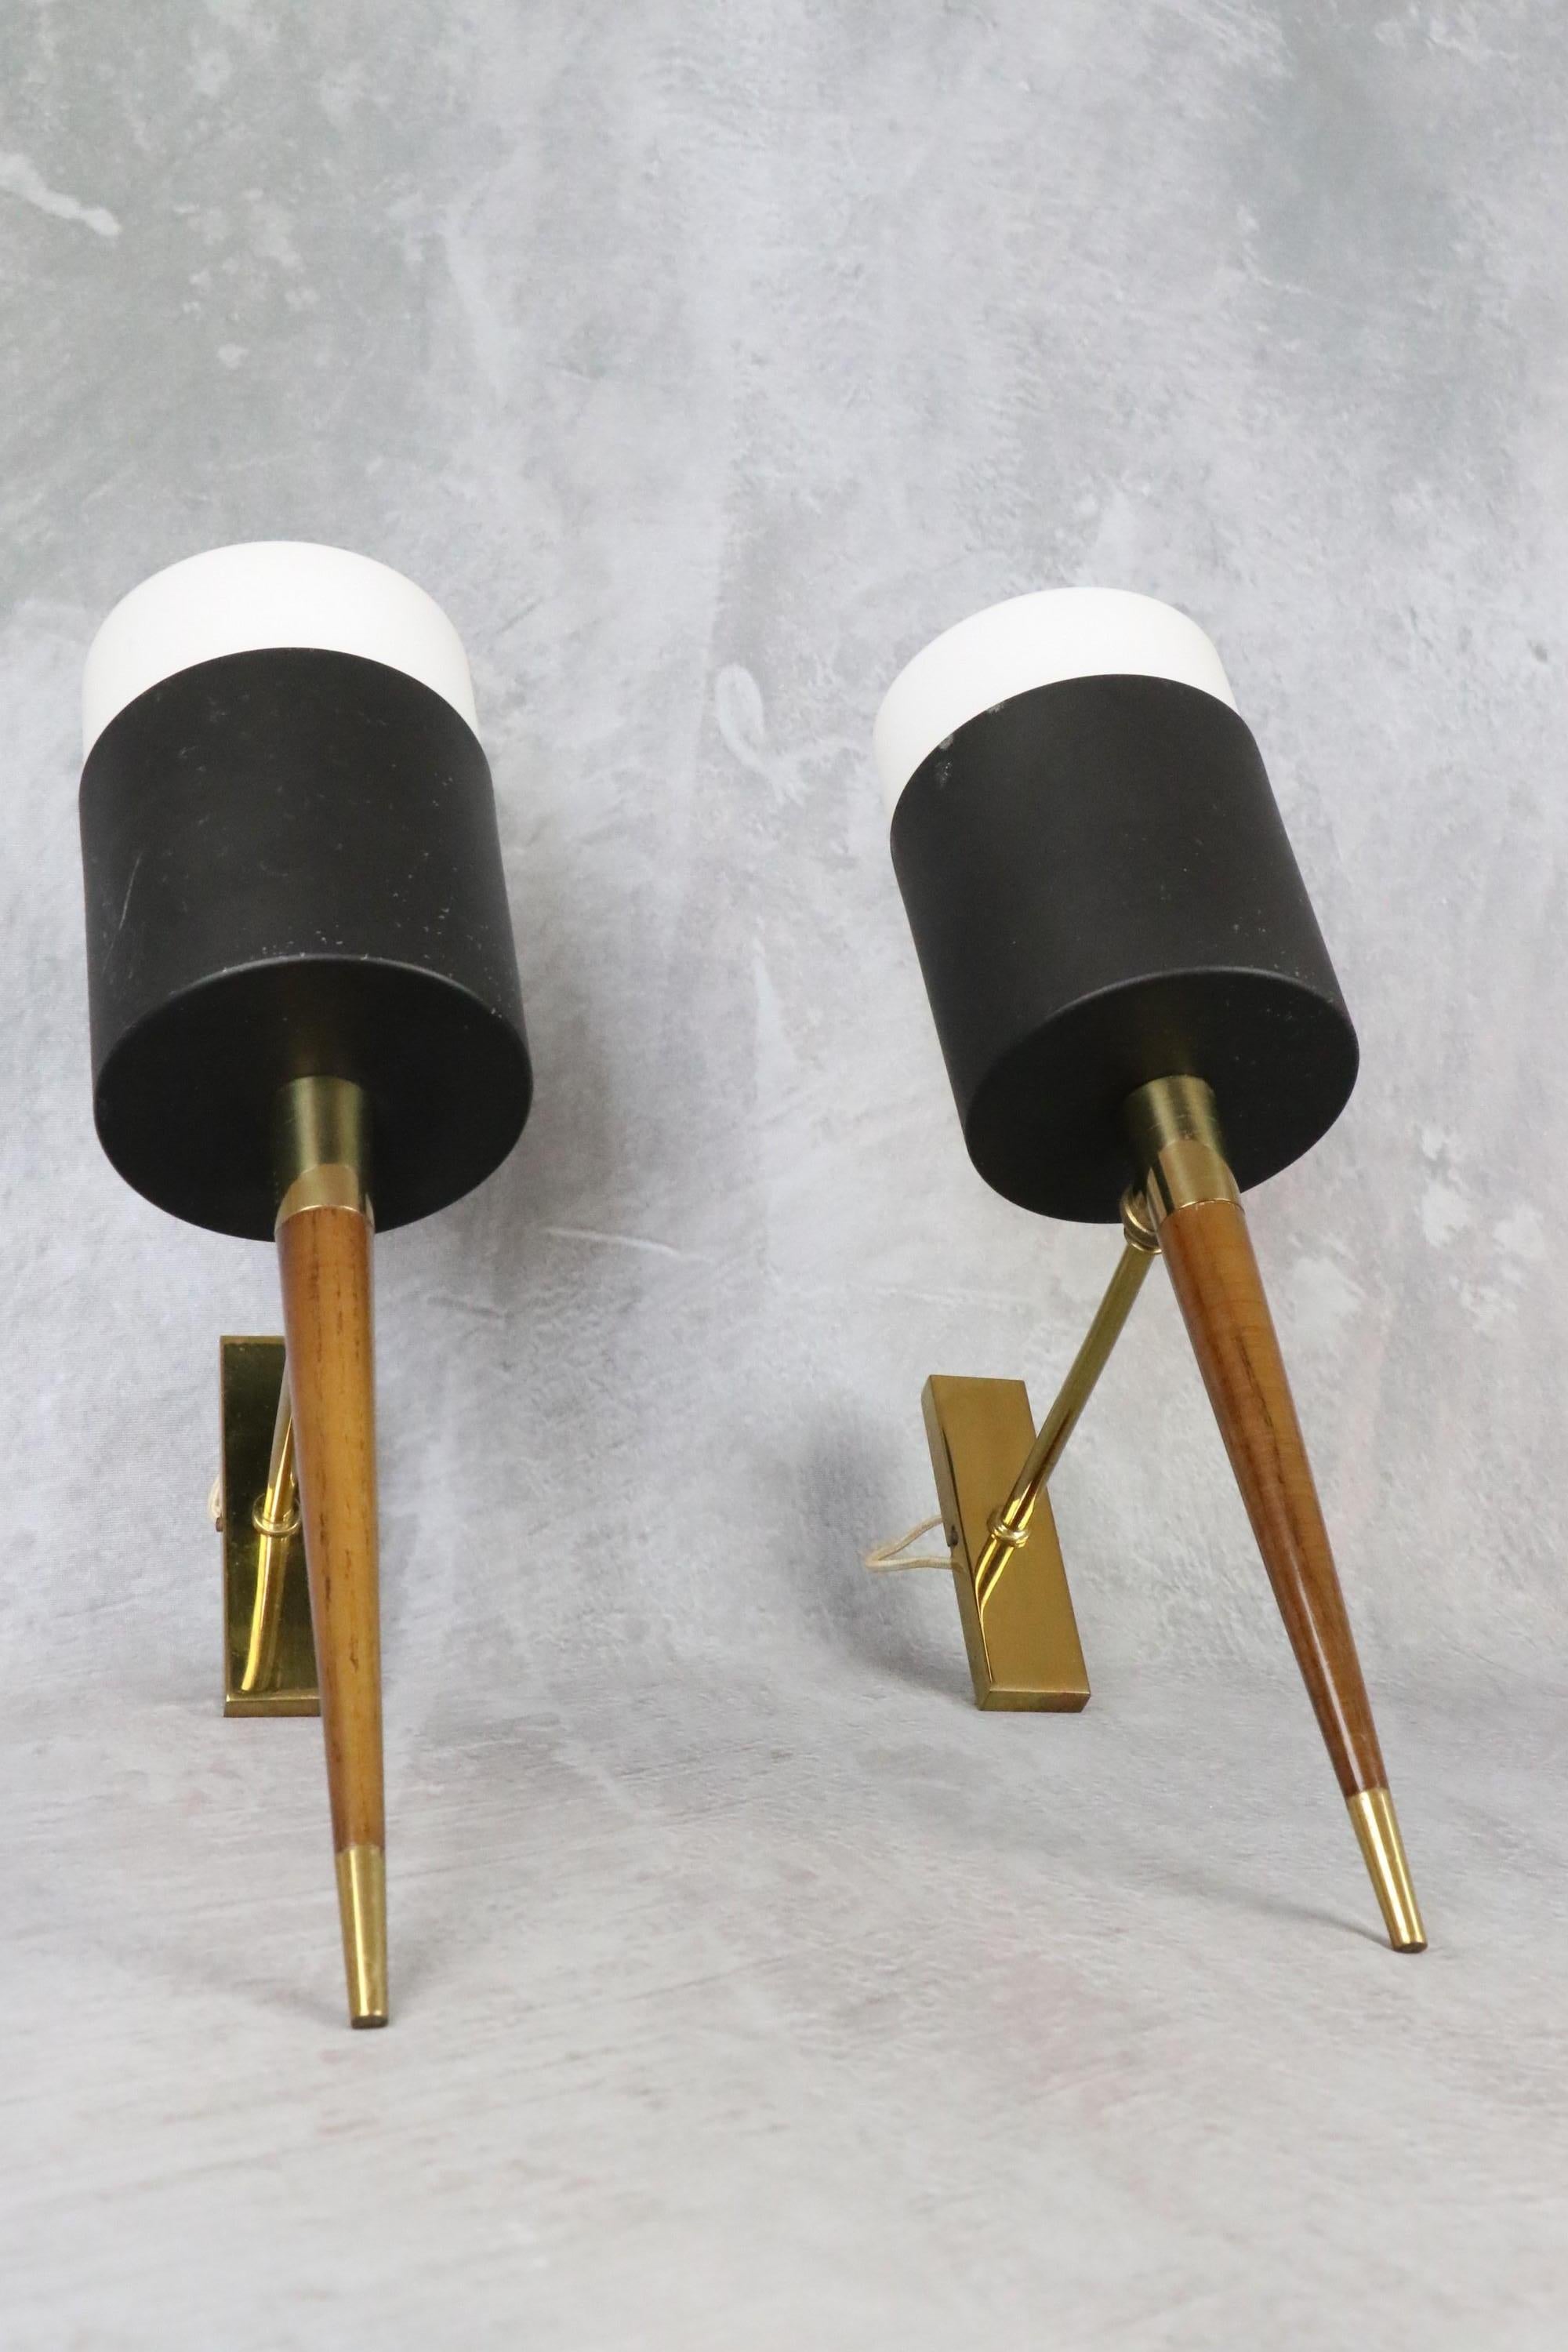 20th Century Maison Arlus, Pair of Mid-Century Modern Wall Lamps, 1950s, France